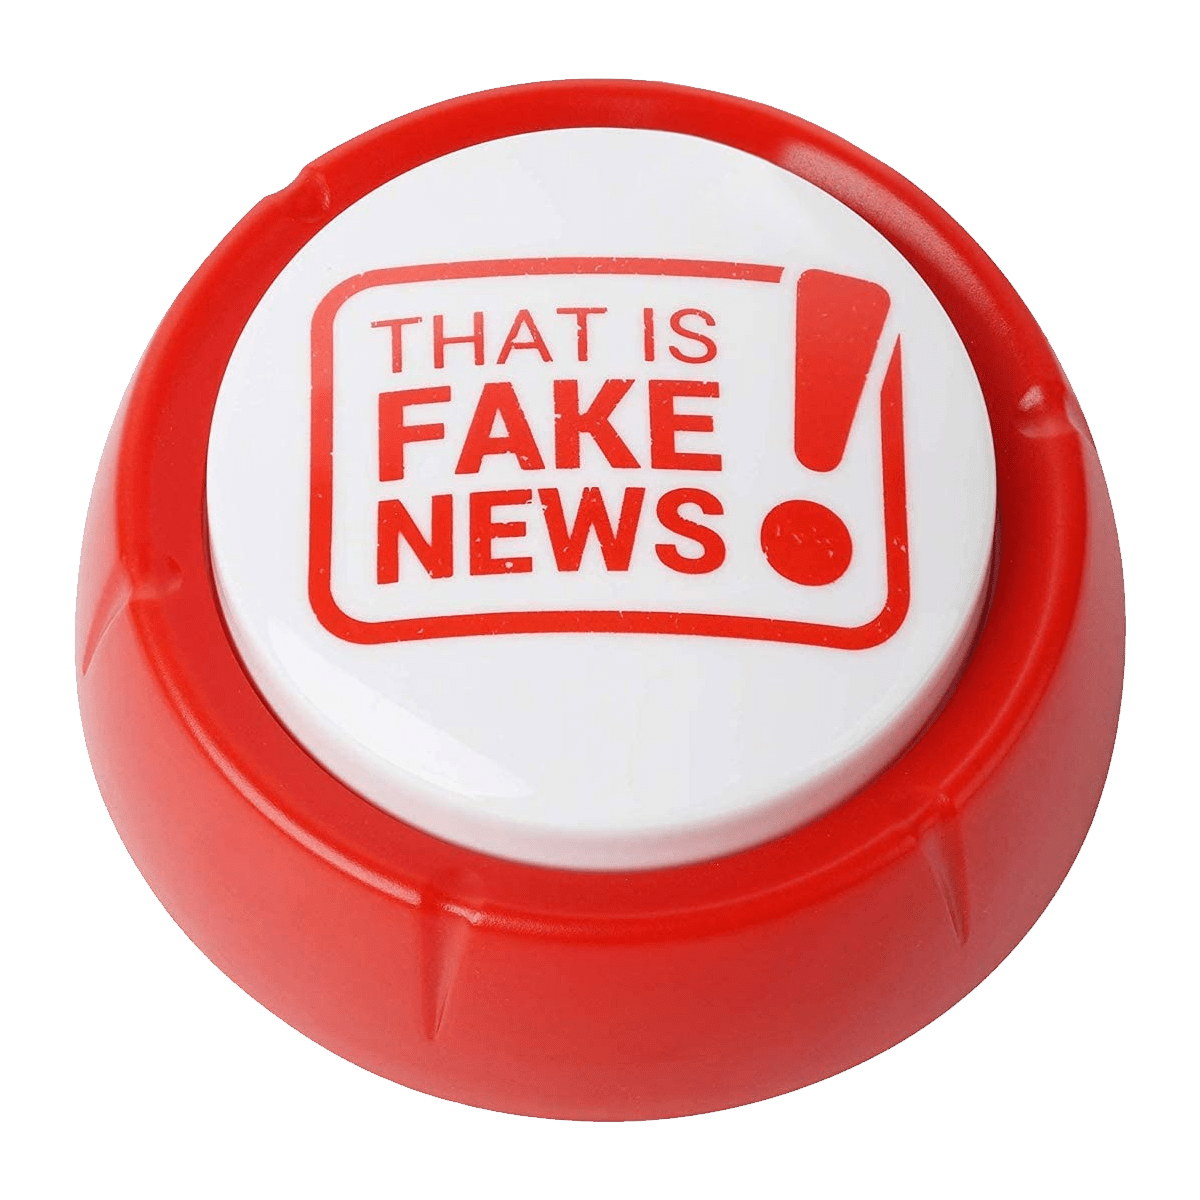 Donald Trump Fake News Button - 11 Fake News Quotes in Real Voice - Batteries Included